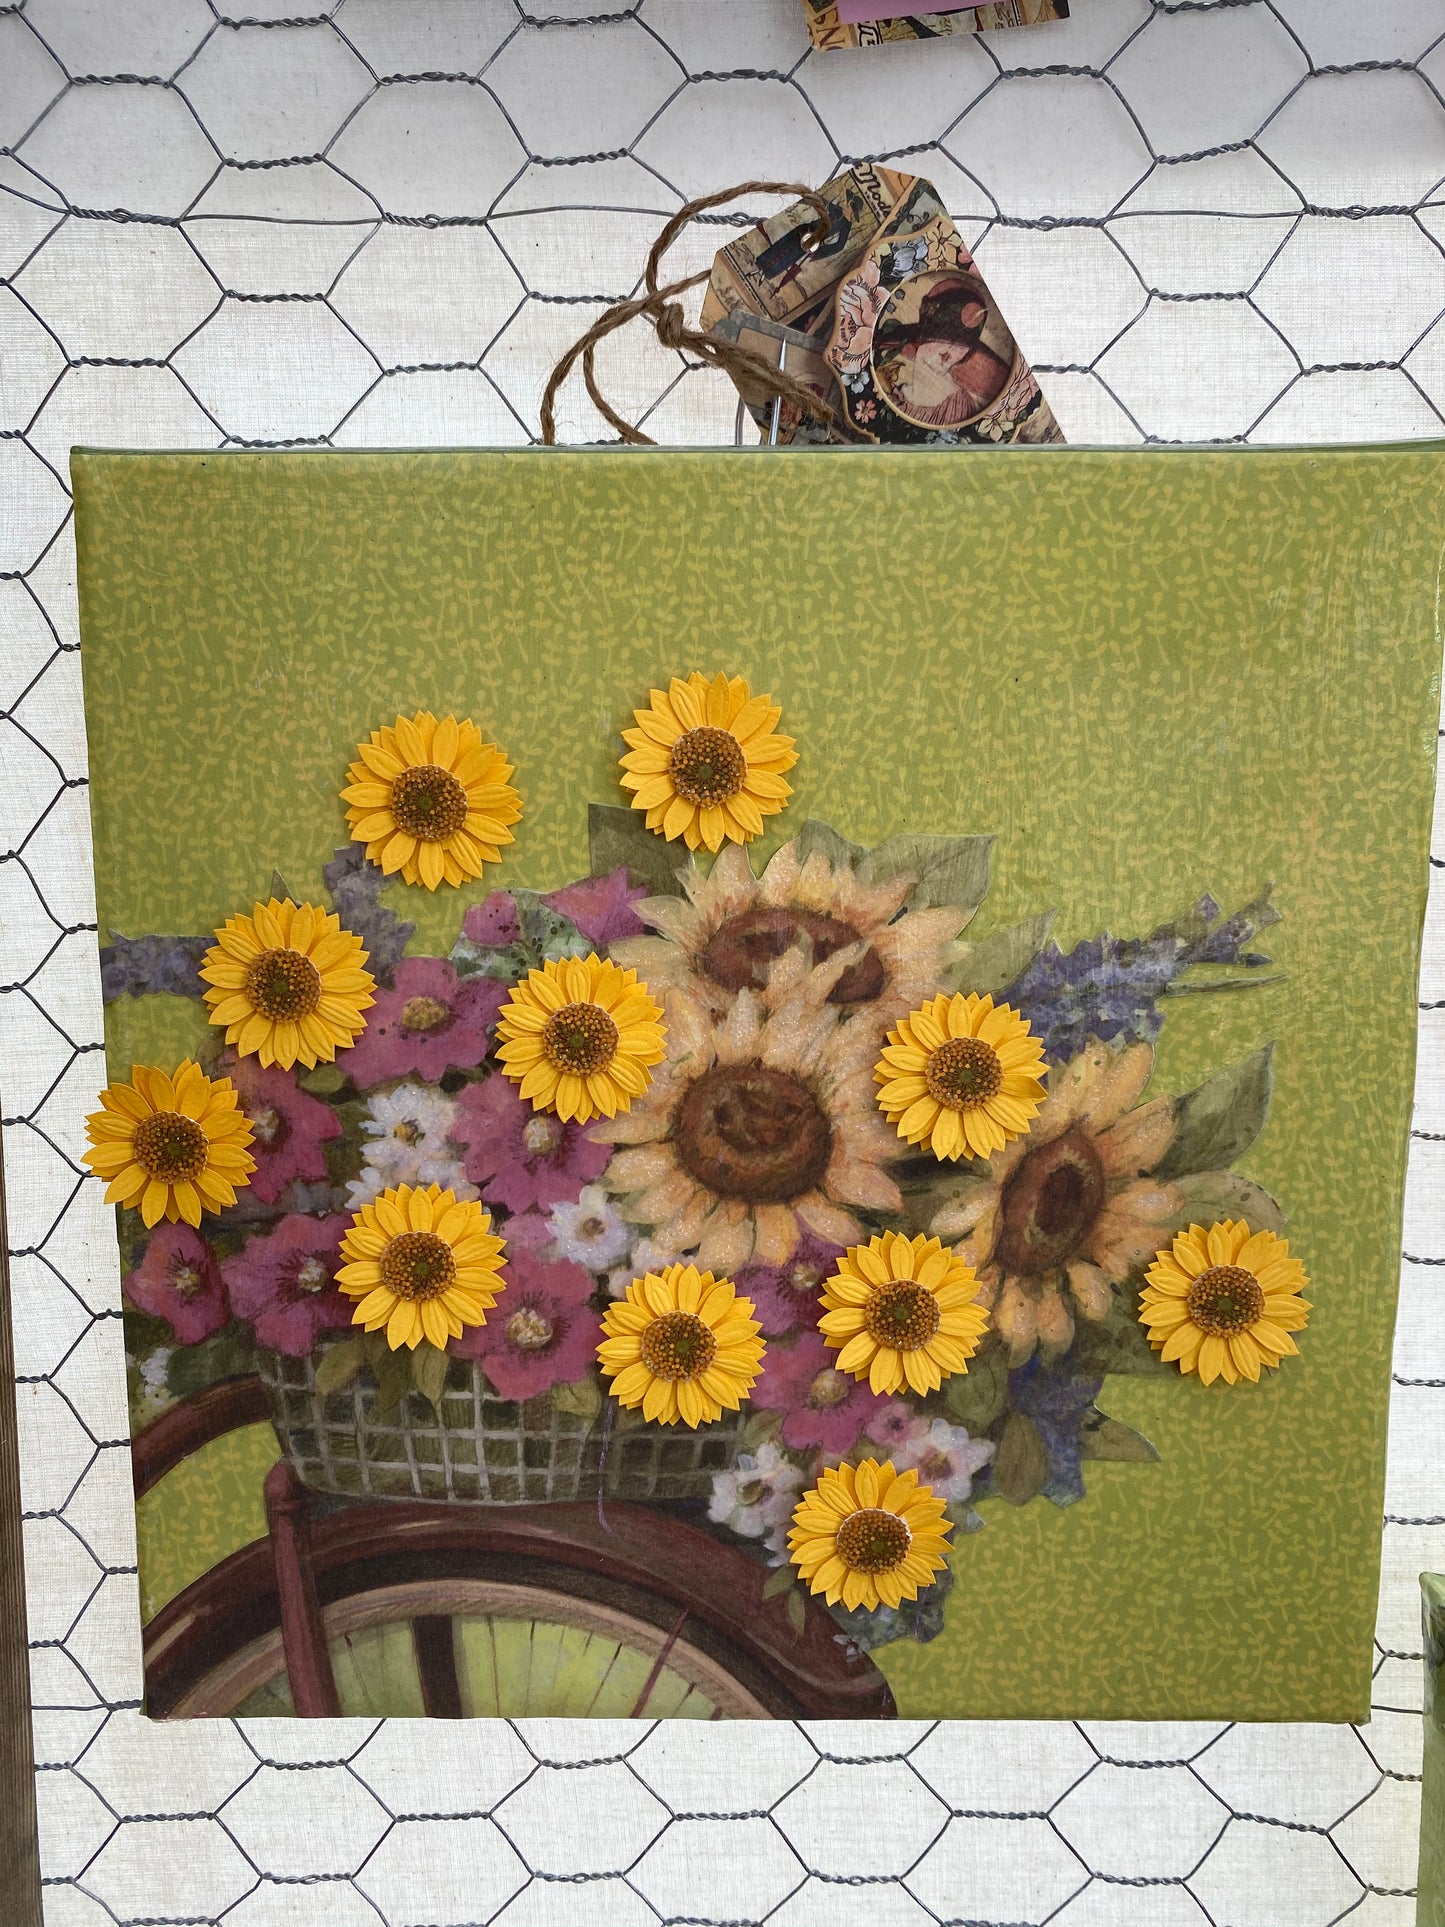 Flowers in a Bicycle Basket